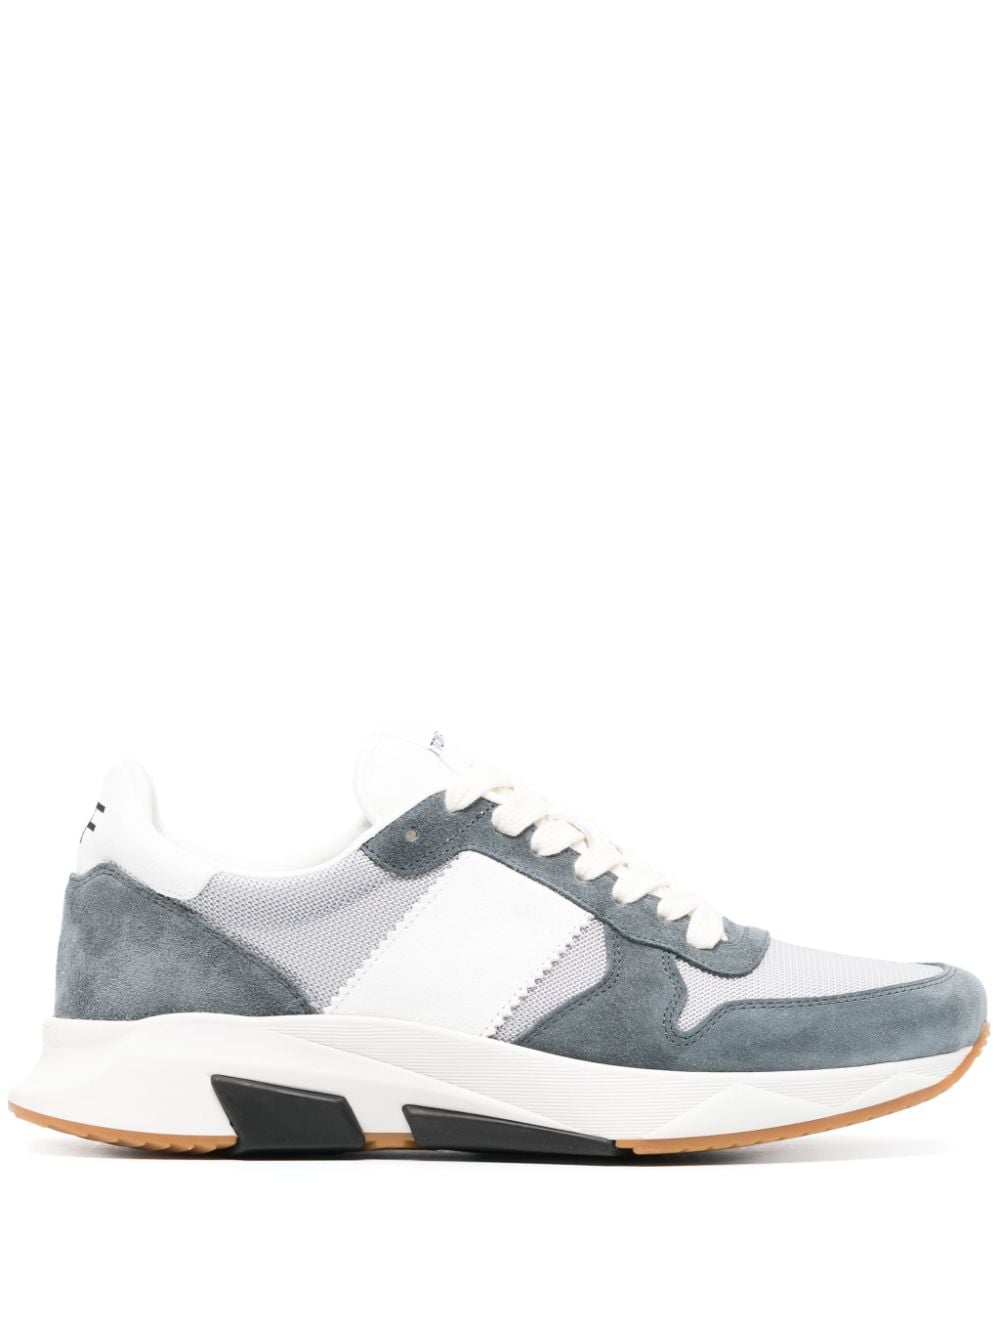 TOM FORD Jager suede chunky sneakers - Grey von TOM FORD